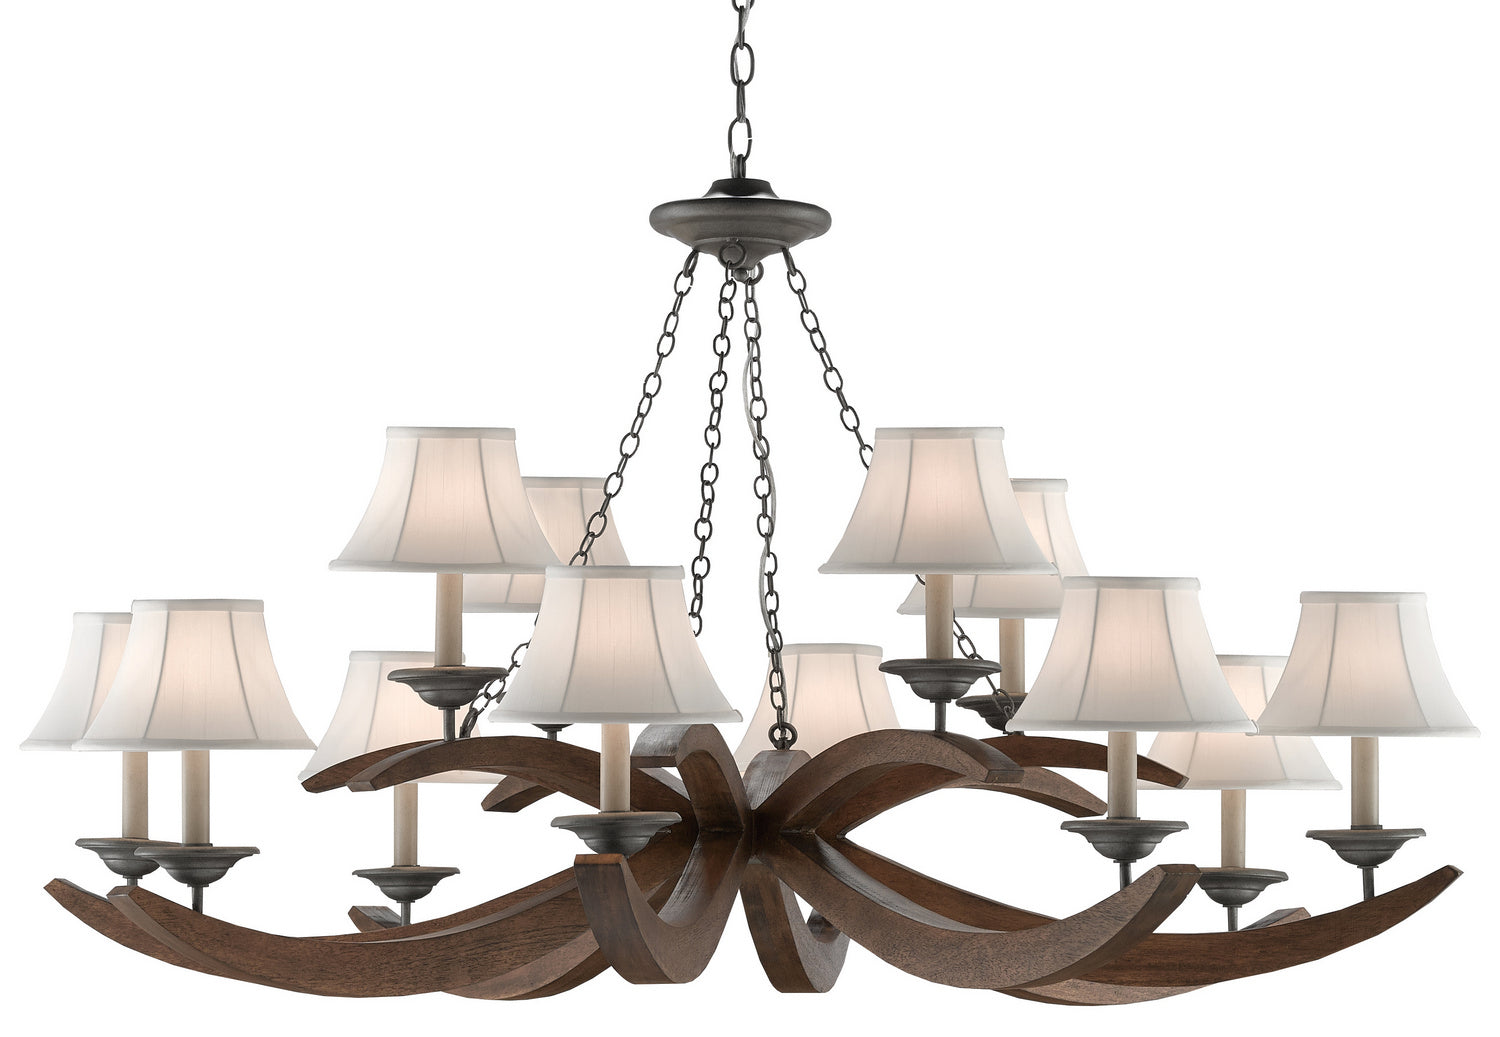 12 Light Chandelier from the Whitlow collection in Burnt Wood/Antique Galvanize finish